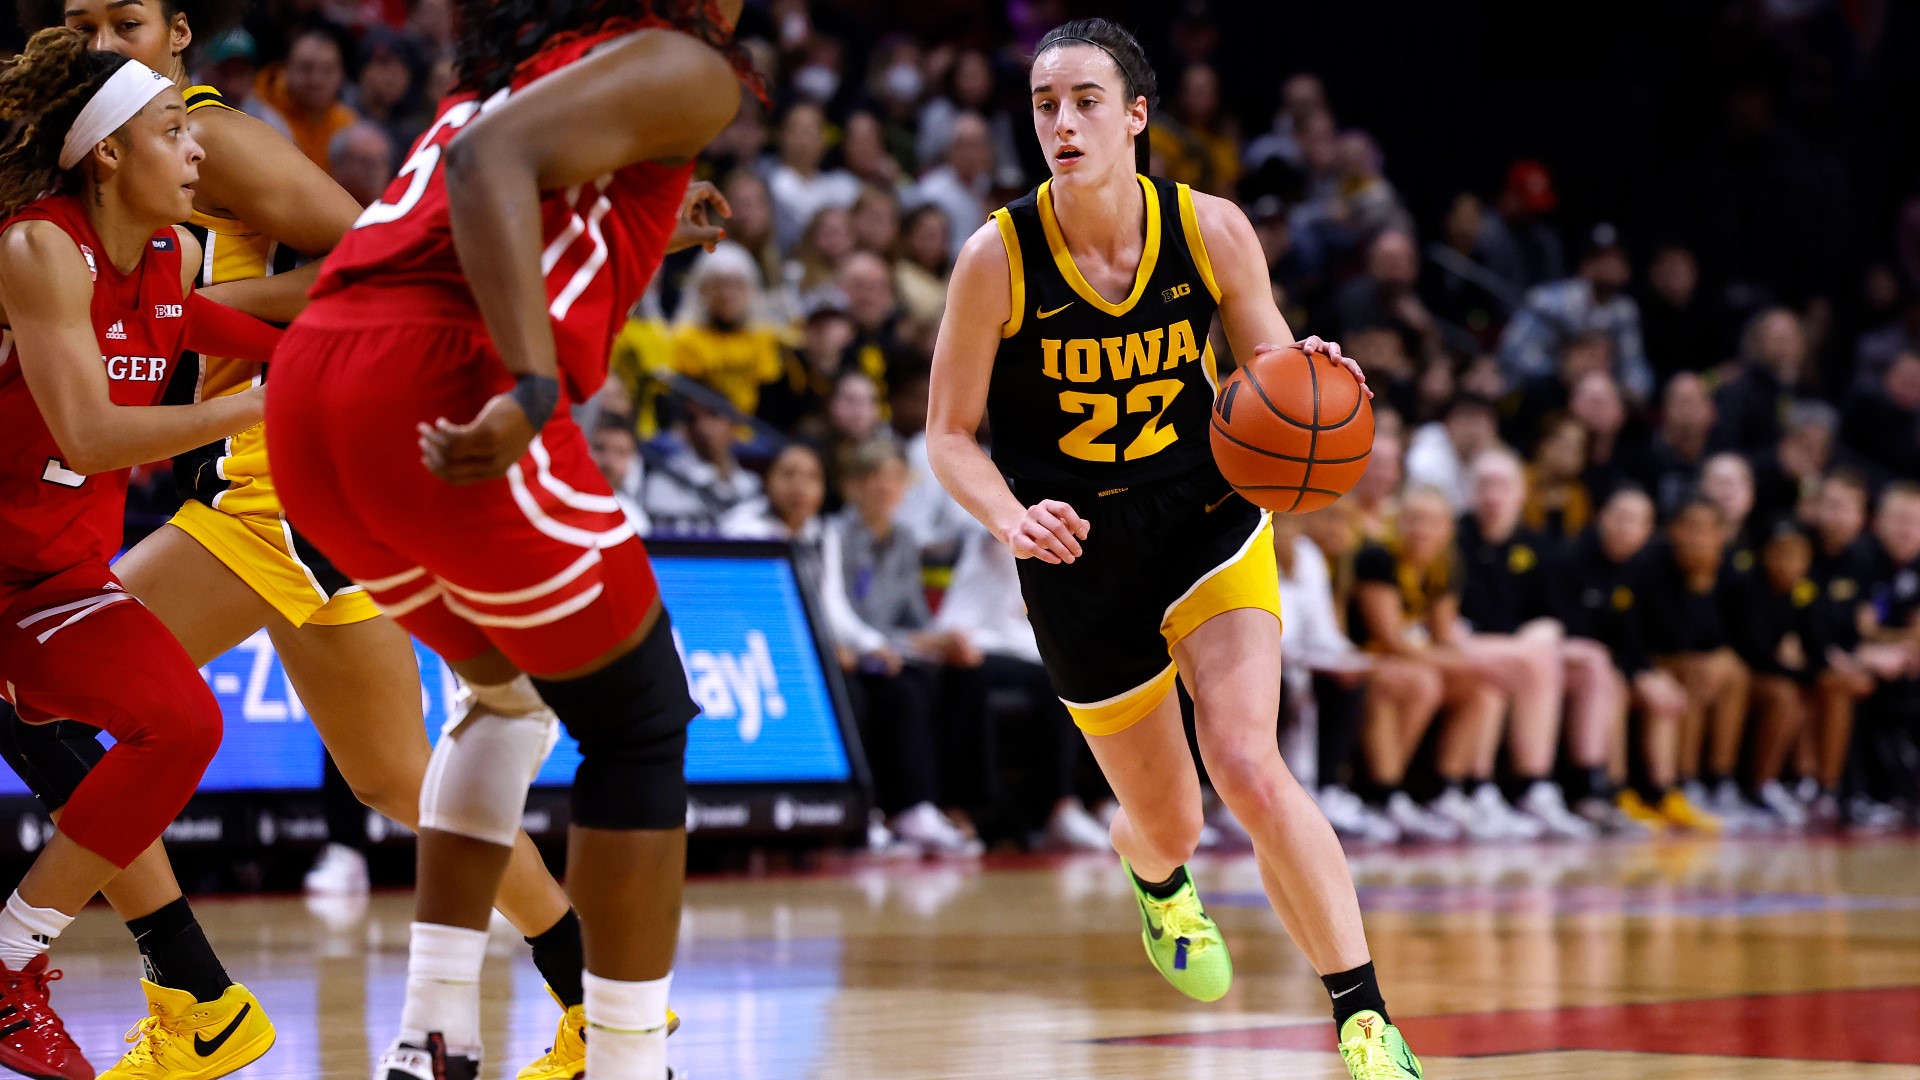 The Iowa Hawkeyes took their first loss of the season to Ohio State in overtime this weekend, but in the middle of the commotion, one fan ran into Caitlin Clark.